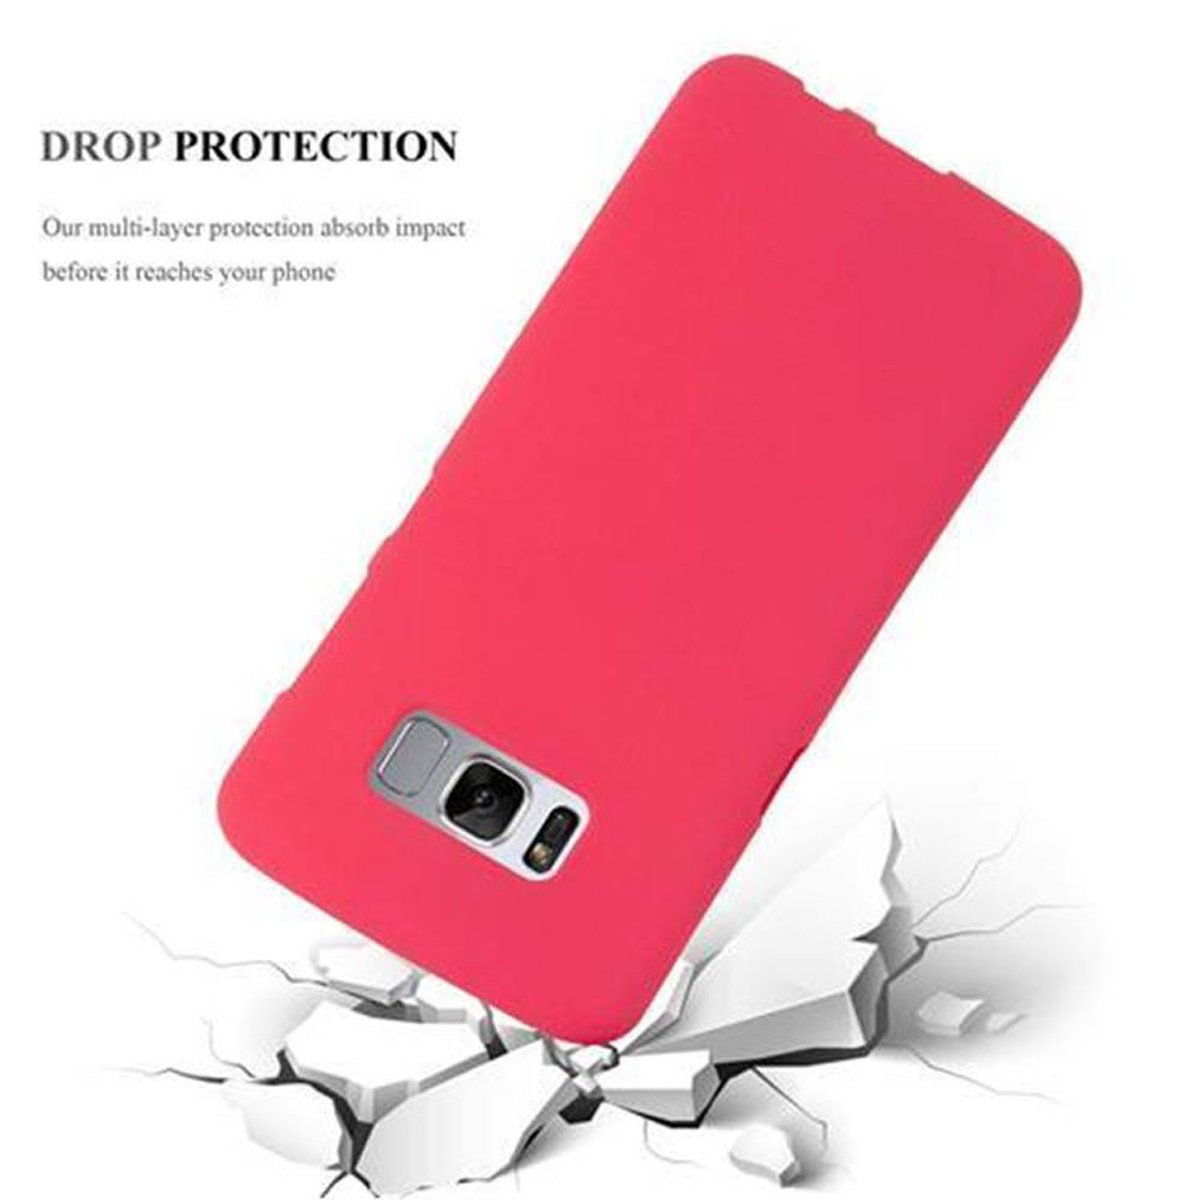 TPU ROT Samsung, Backcover, Galaxy FROST Schutzhülle, Frosted CADORABO S8,